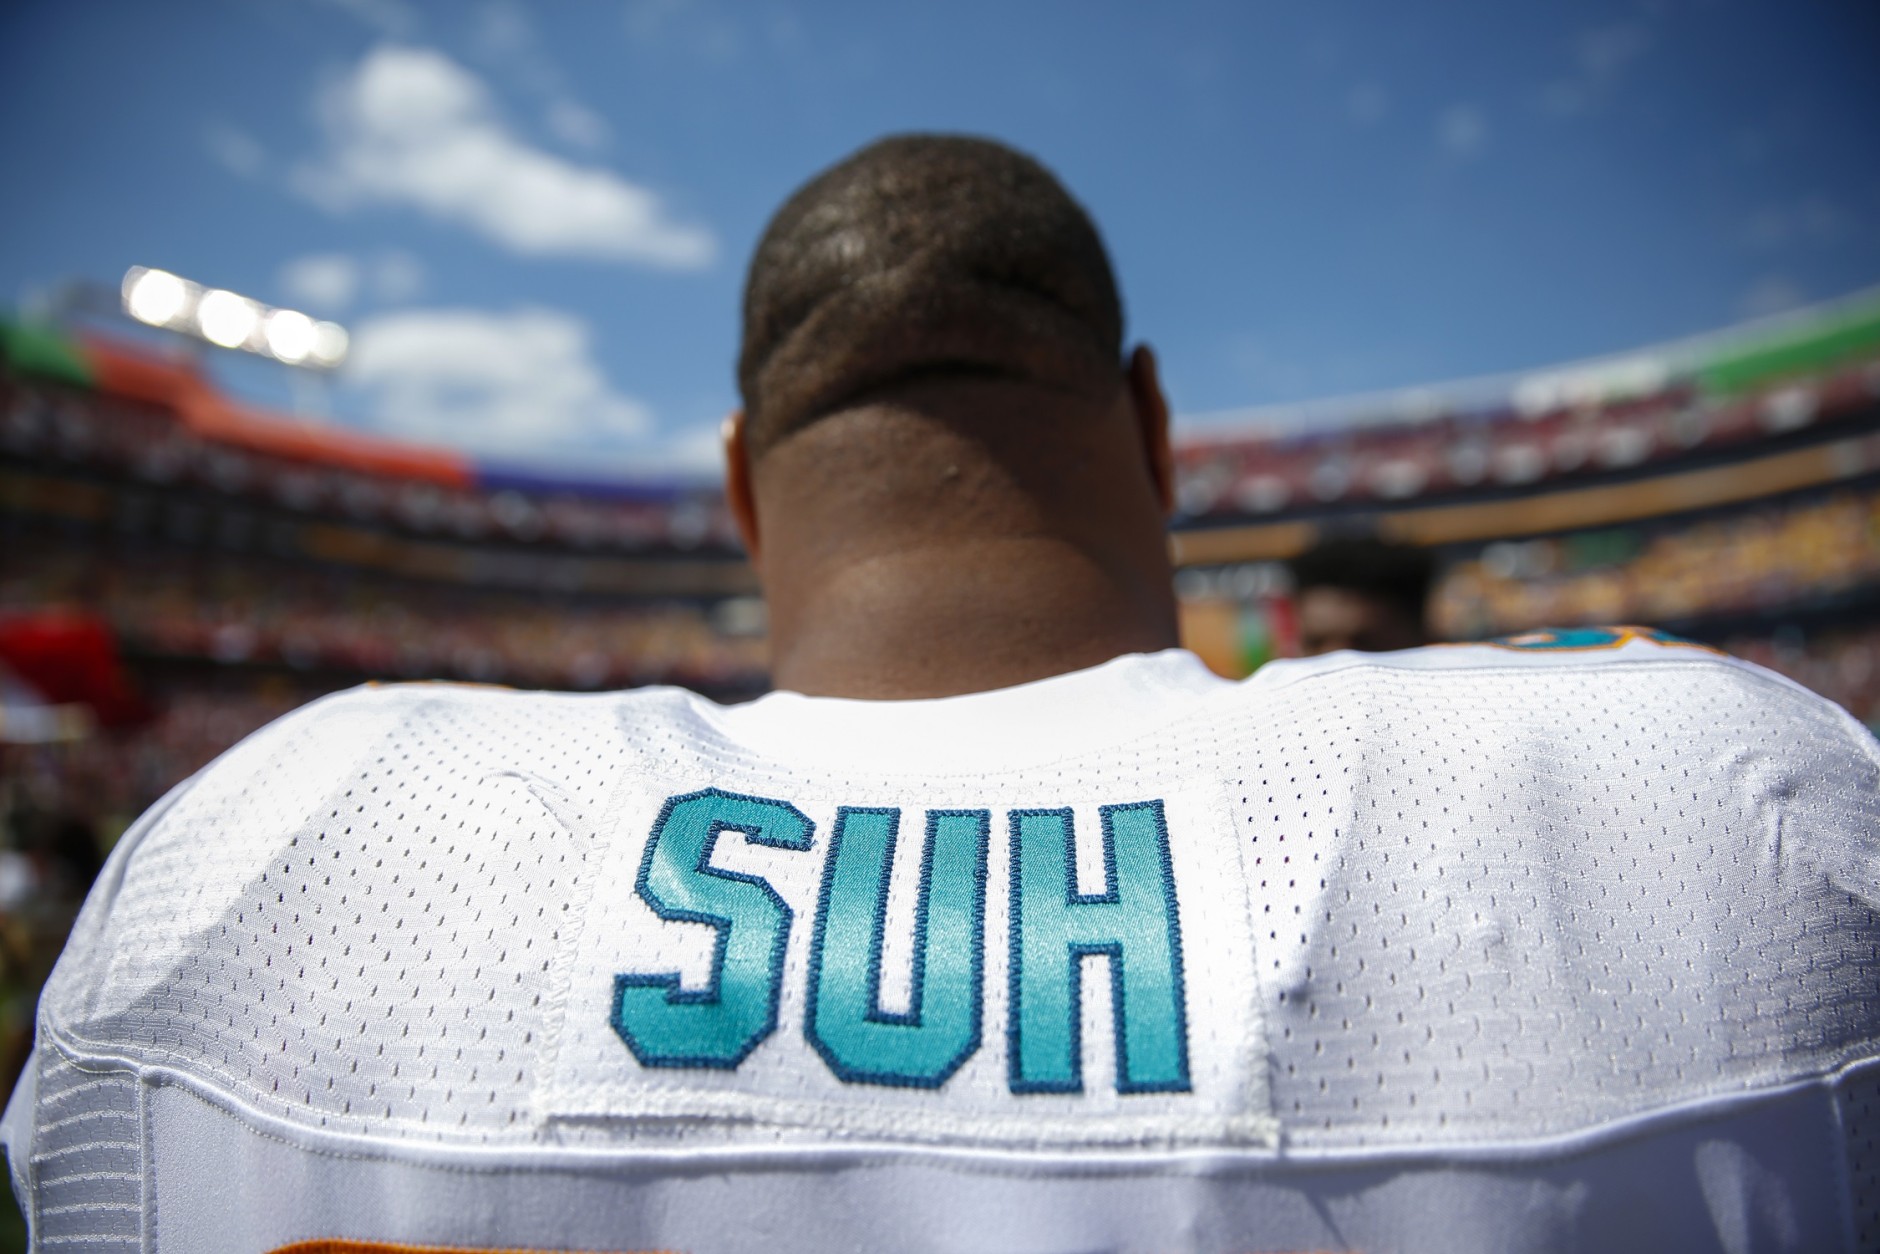 Miami Dolphins defensive tackle Ndamukong Suh looks at the field during pre-game warm ups before the start of an NFL football game against the Washington Redskins on Sunday, Sept. 13, 2015, in Landover, Md. (AP Photo/Evan Vucci)